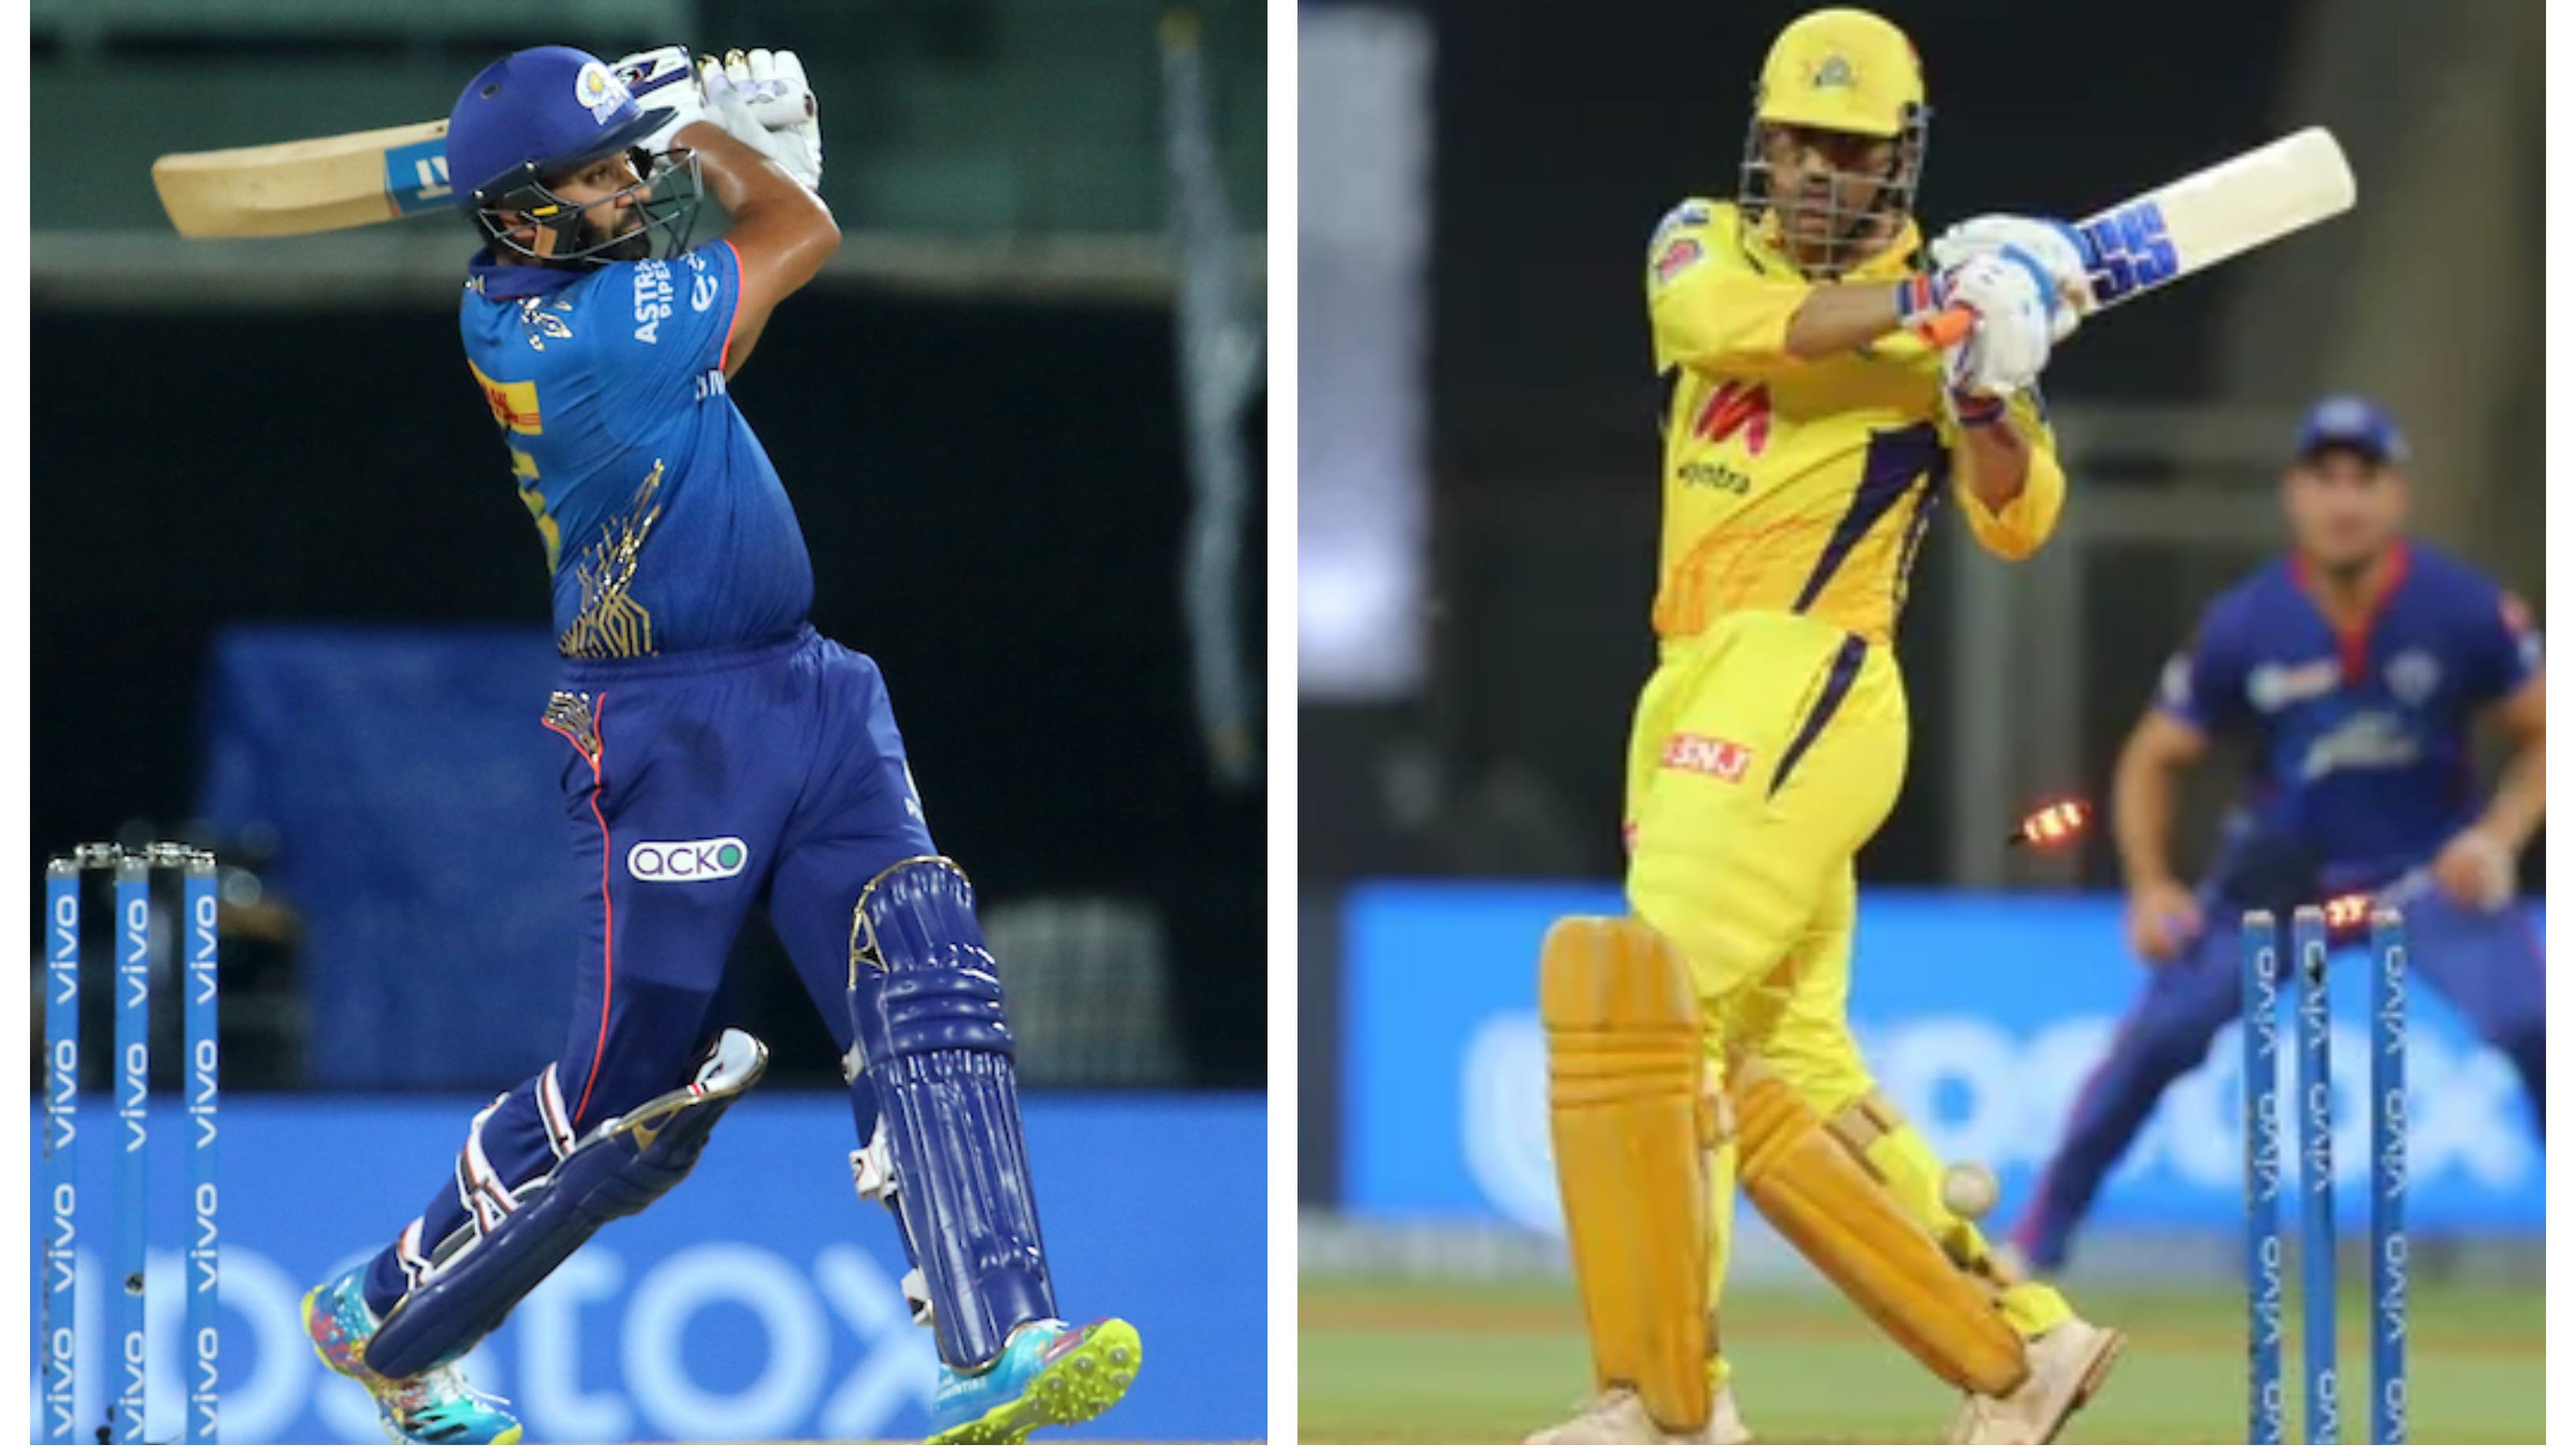 IPL 2021: Rohit Sharma surpasses MS Dhoni to register most sixes by an Indian batsman in IPL